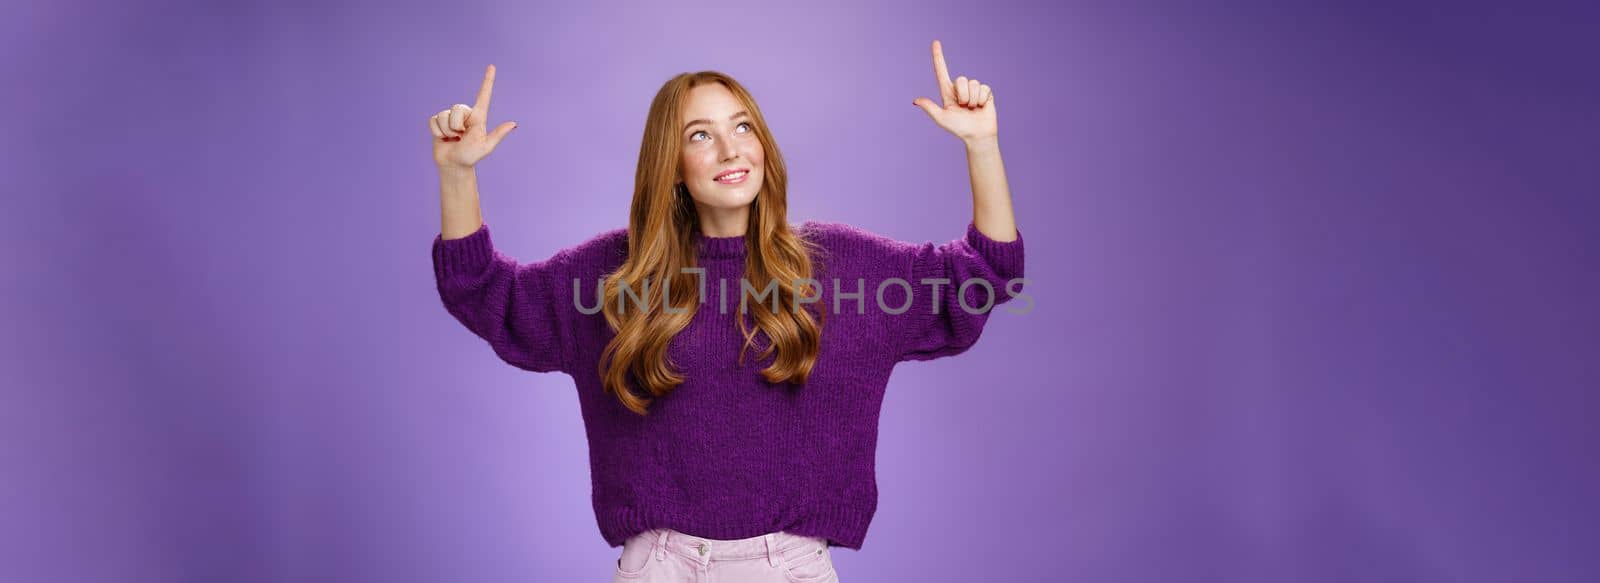 Lifestyle. Dreamy girl with red hair and freckles in warm cozy purple sweater raising hands looking and pointing up with intrigued and happy charmed expression smiling as liking curious product over violet wall.